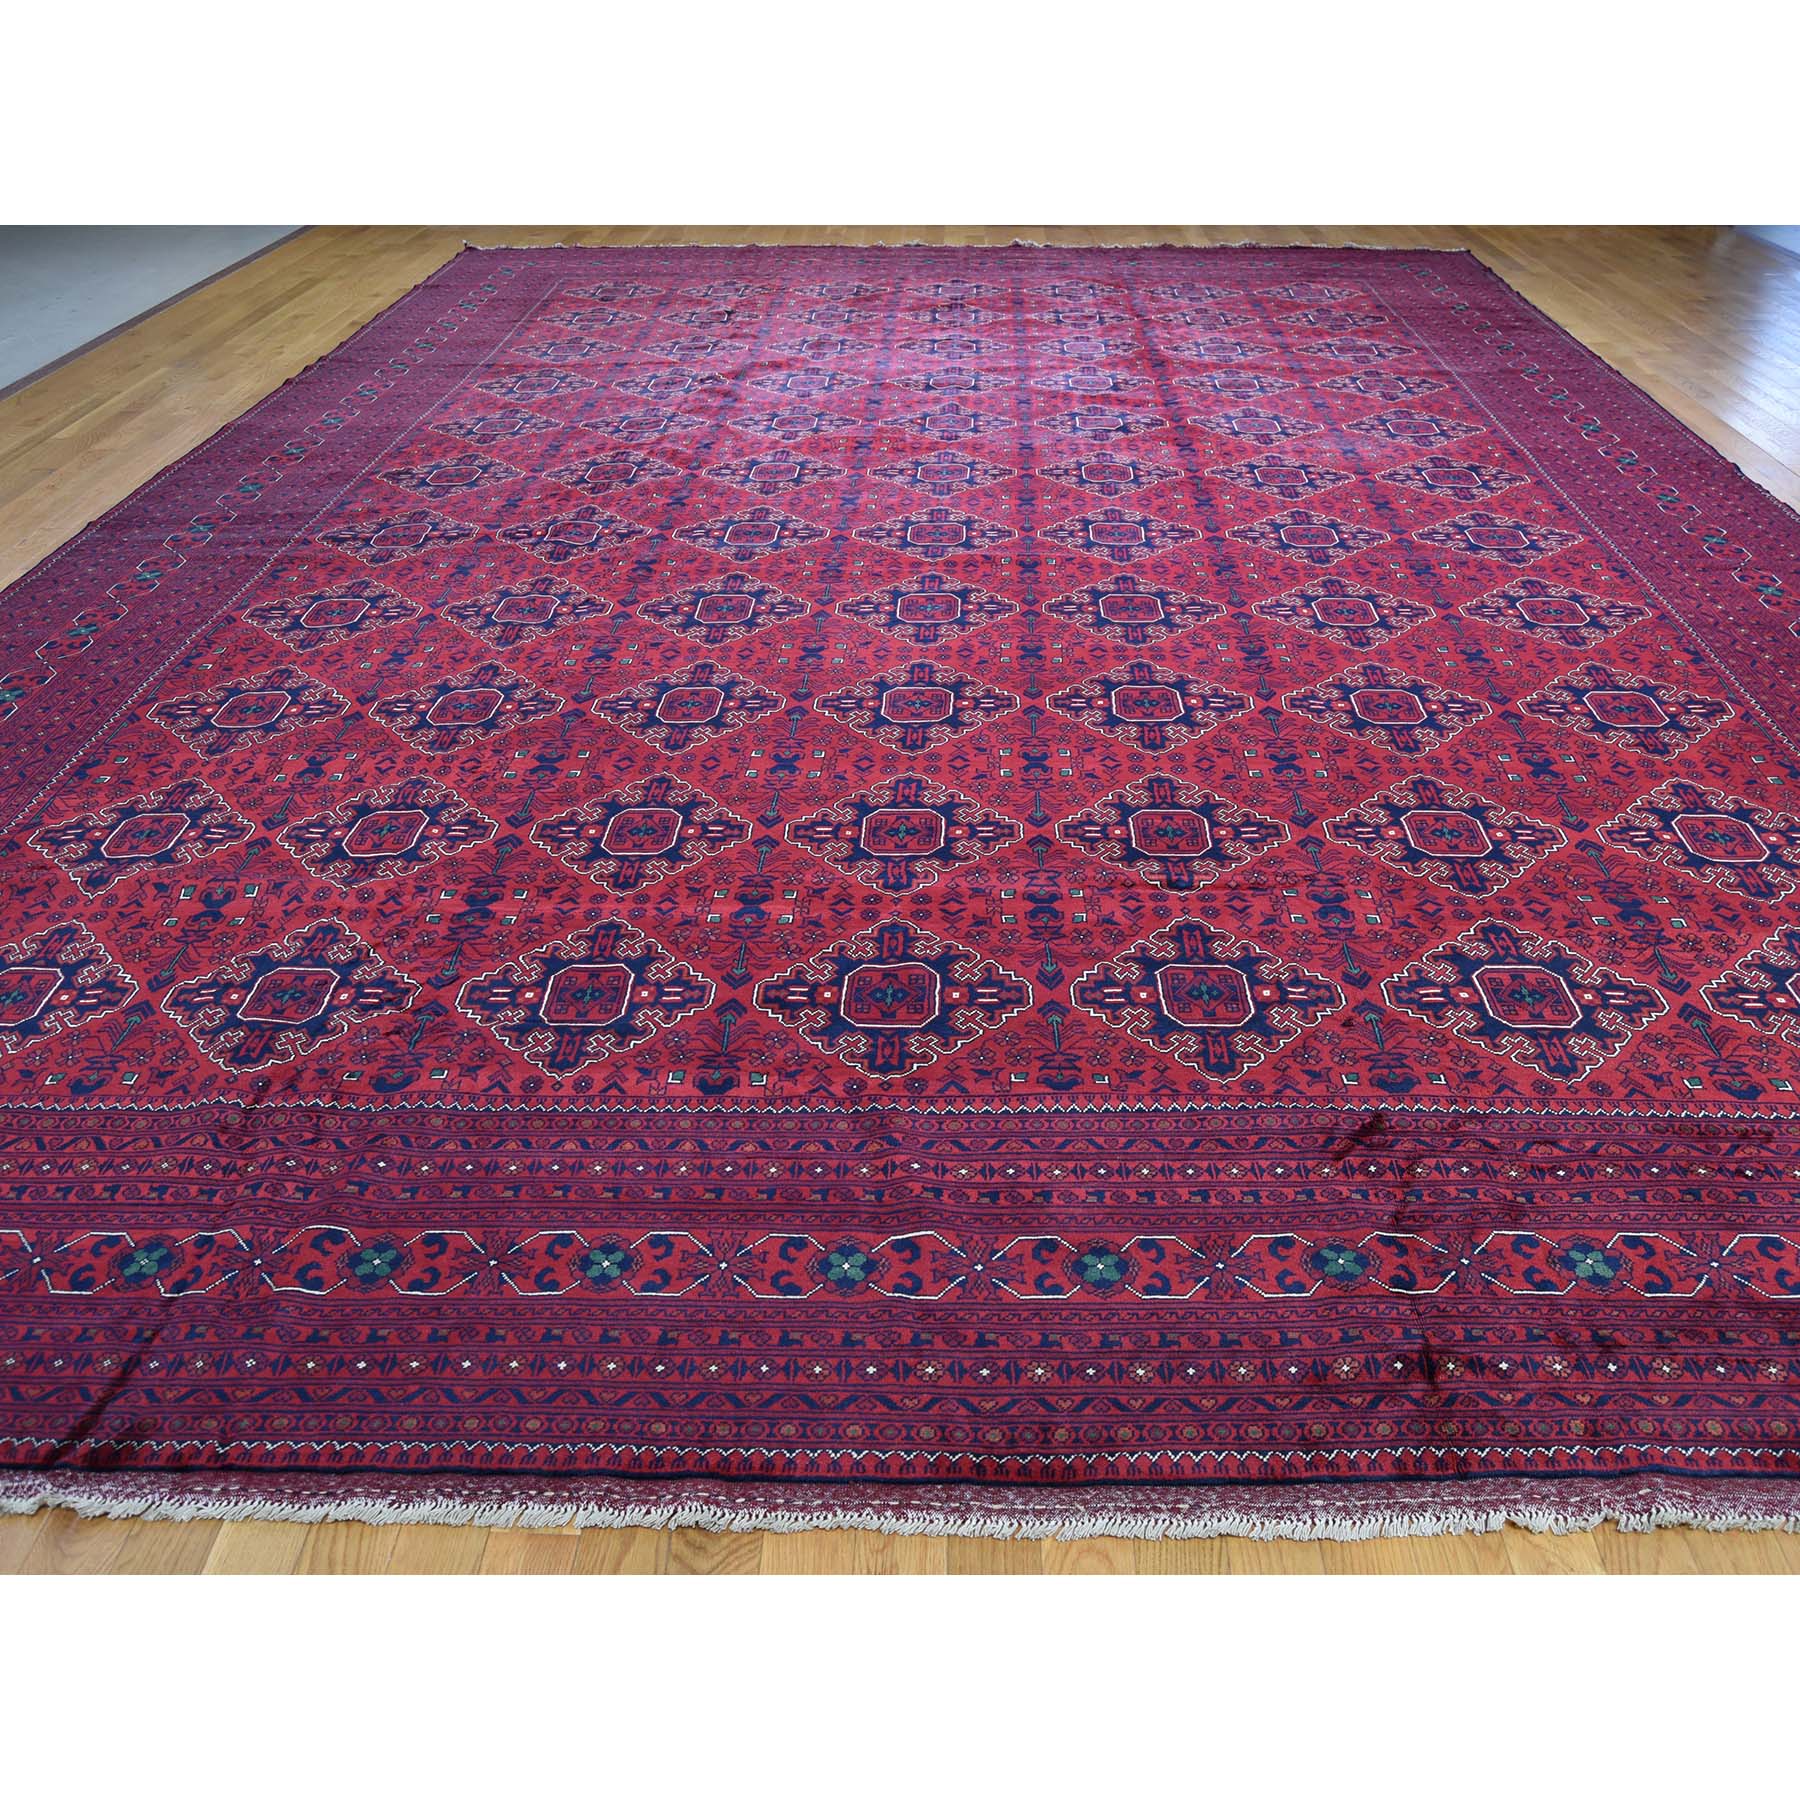 13'1"x19'8" Mansion Size Afghan Khamyab Pure Wool Hand Woven Oriental Rug 